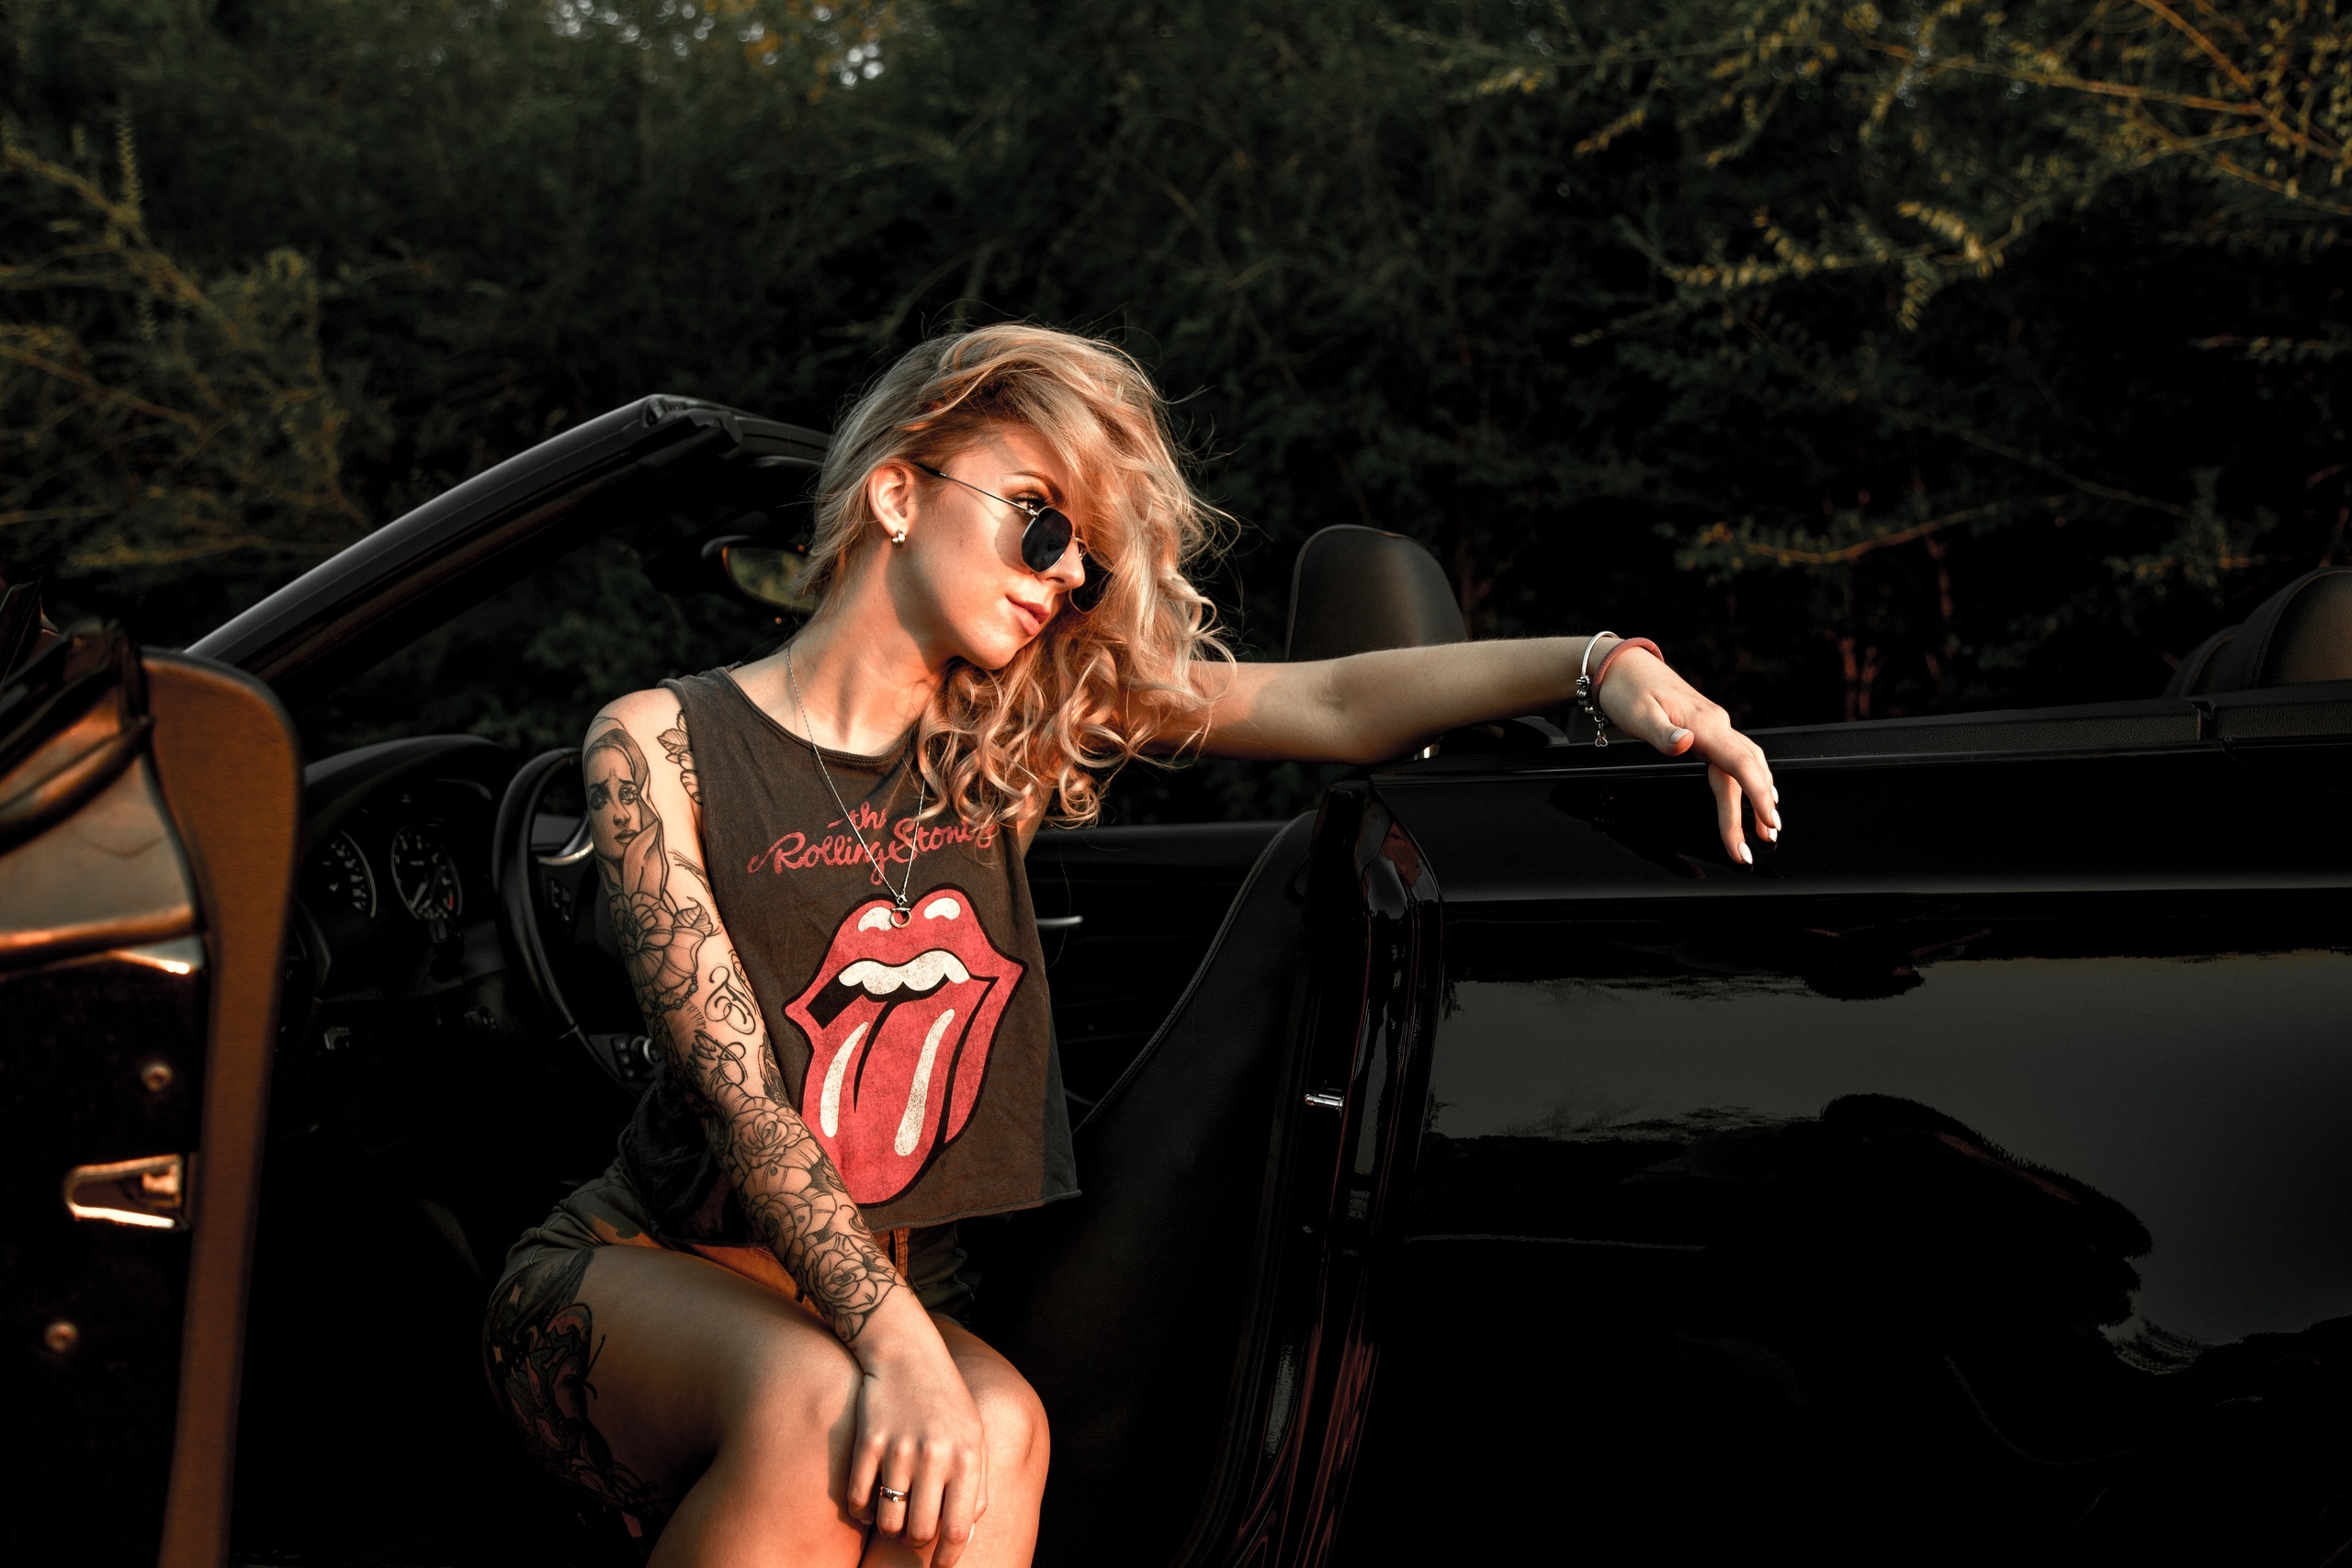 People 2560x1707 Elisa Rose women model blonde women outdoors T-shirt women with glasses women with cars tattoo glasses jean shorts trees Rolling Stones car black cars vehicle sitting rolling stones t-shirt sunglasses women with shades inked girls